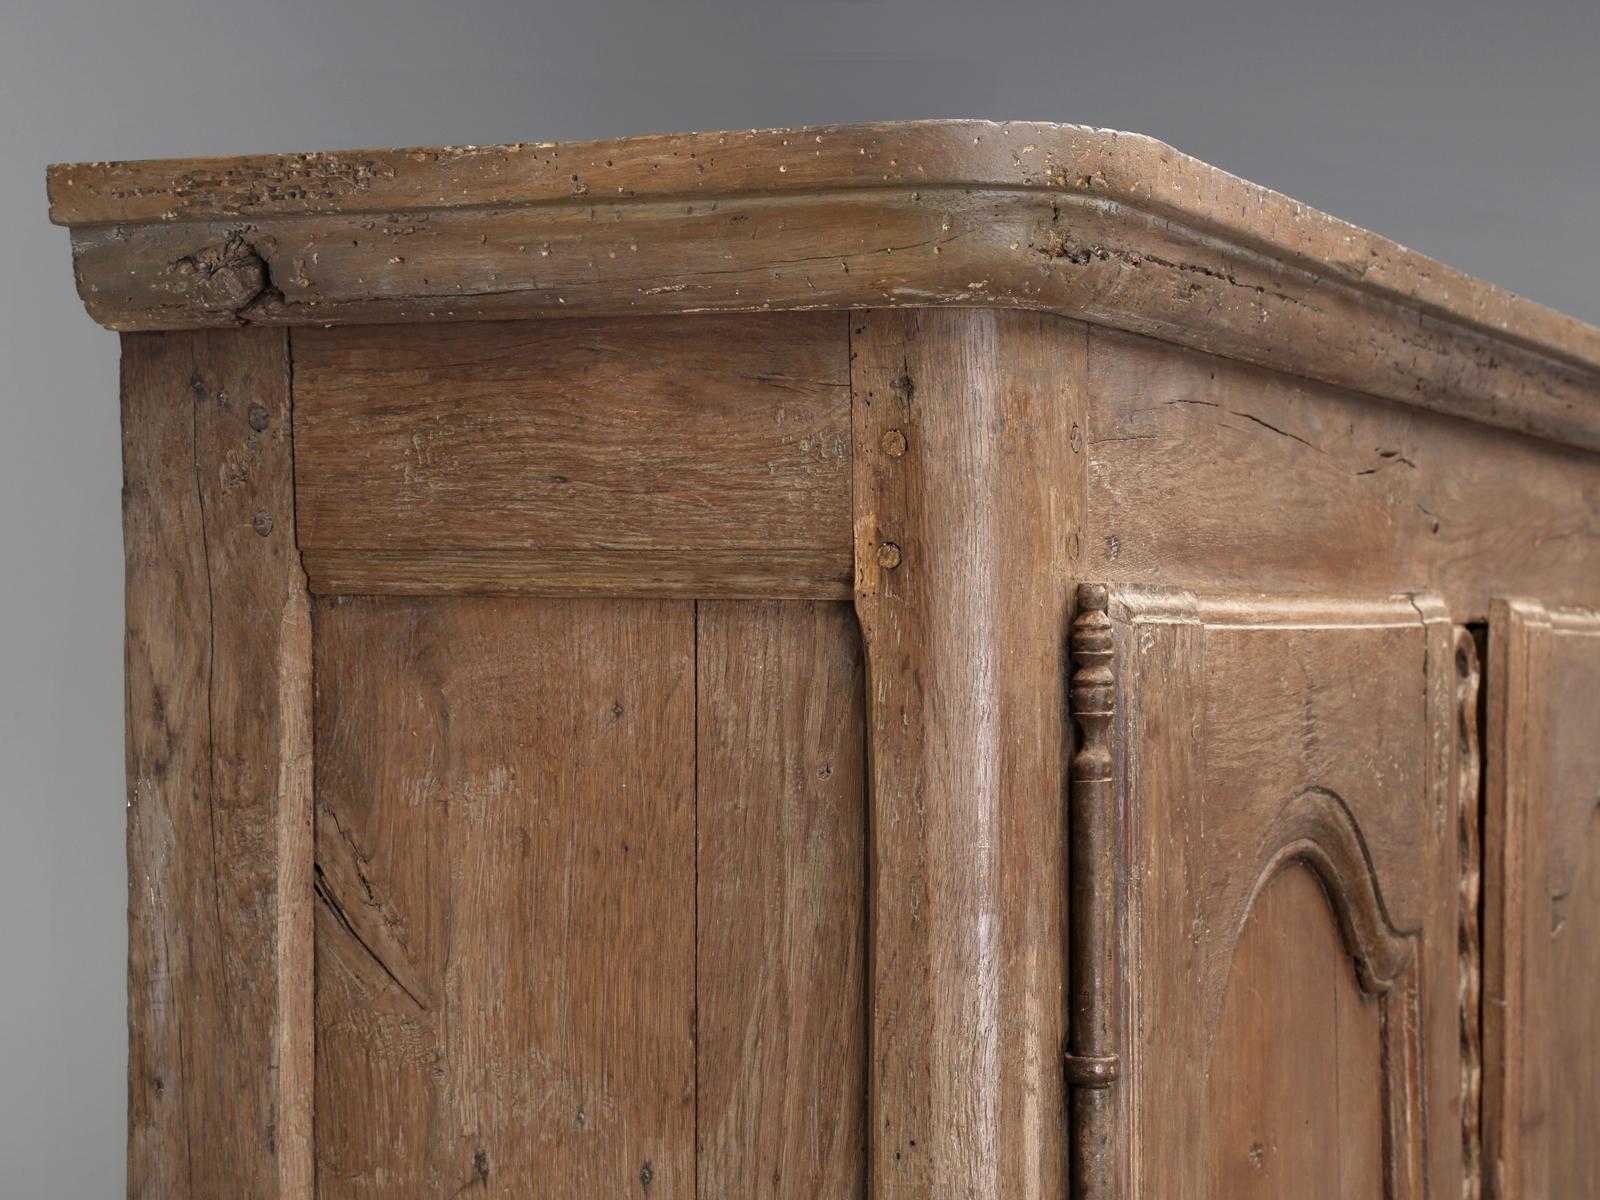 This extremely rare, Antique French Cupboard, is from the Château de Loyat in Brittany, which I believe dates back to the 1500, was in a condition, that Antique dealers can only dream of. The French Cupboard or Cabinet, is exactly what you would